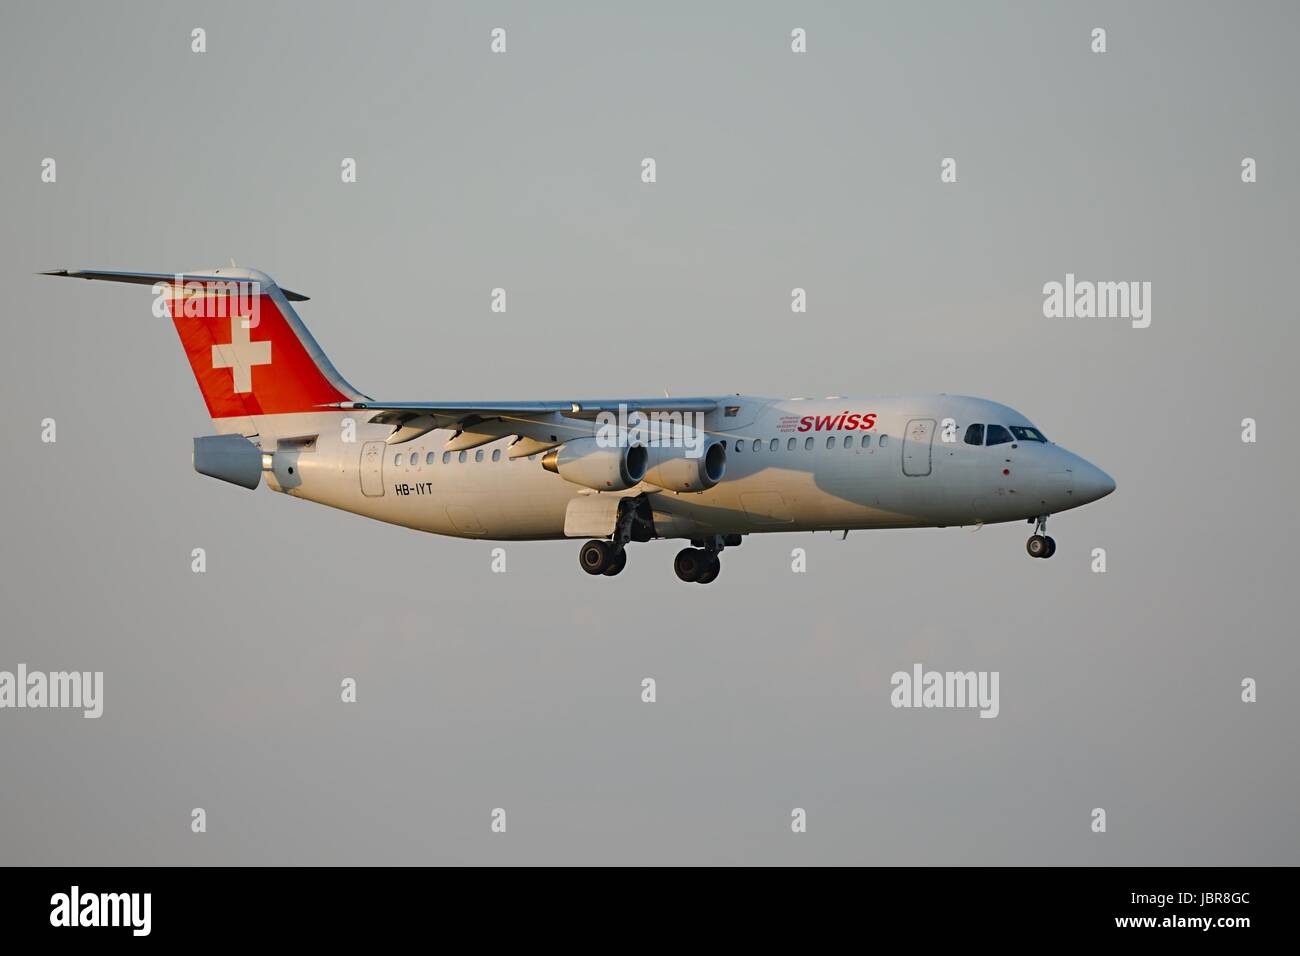 BUDAPEST, HUNGARY - APRIL 7: Swiss airliner approaching Budapest Liszt Ferenc Airport, April 7th 2014. Swiss International Air Lines is Switzerland's flag carrier airline. Stock Photo